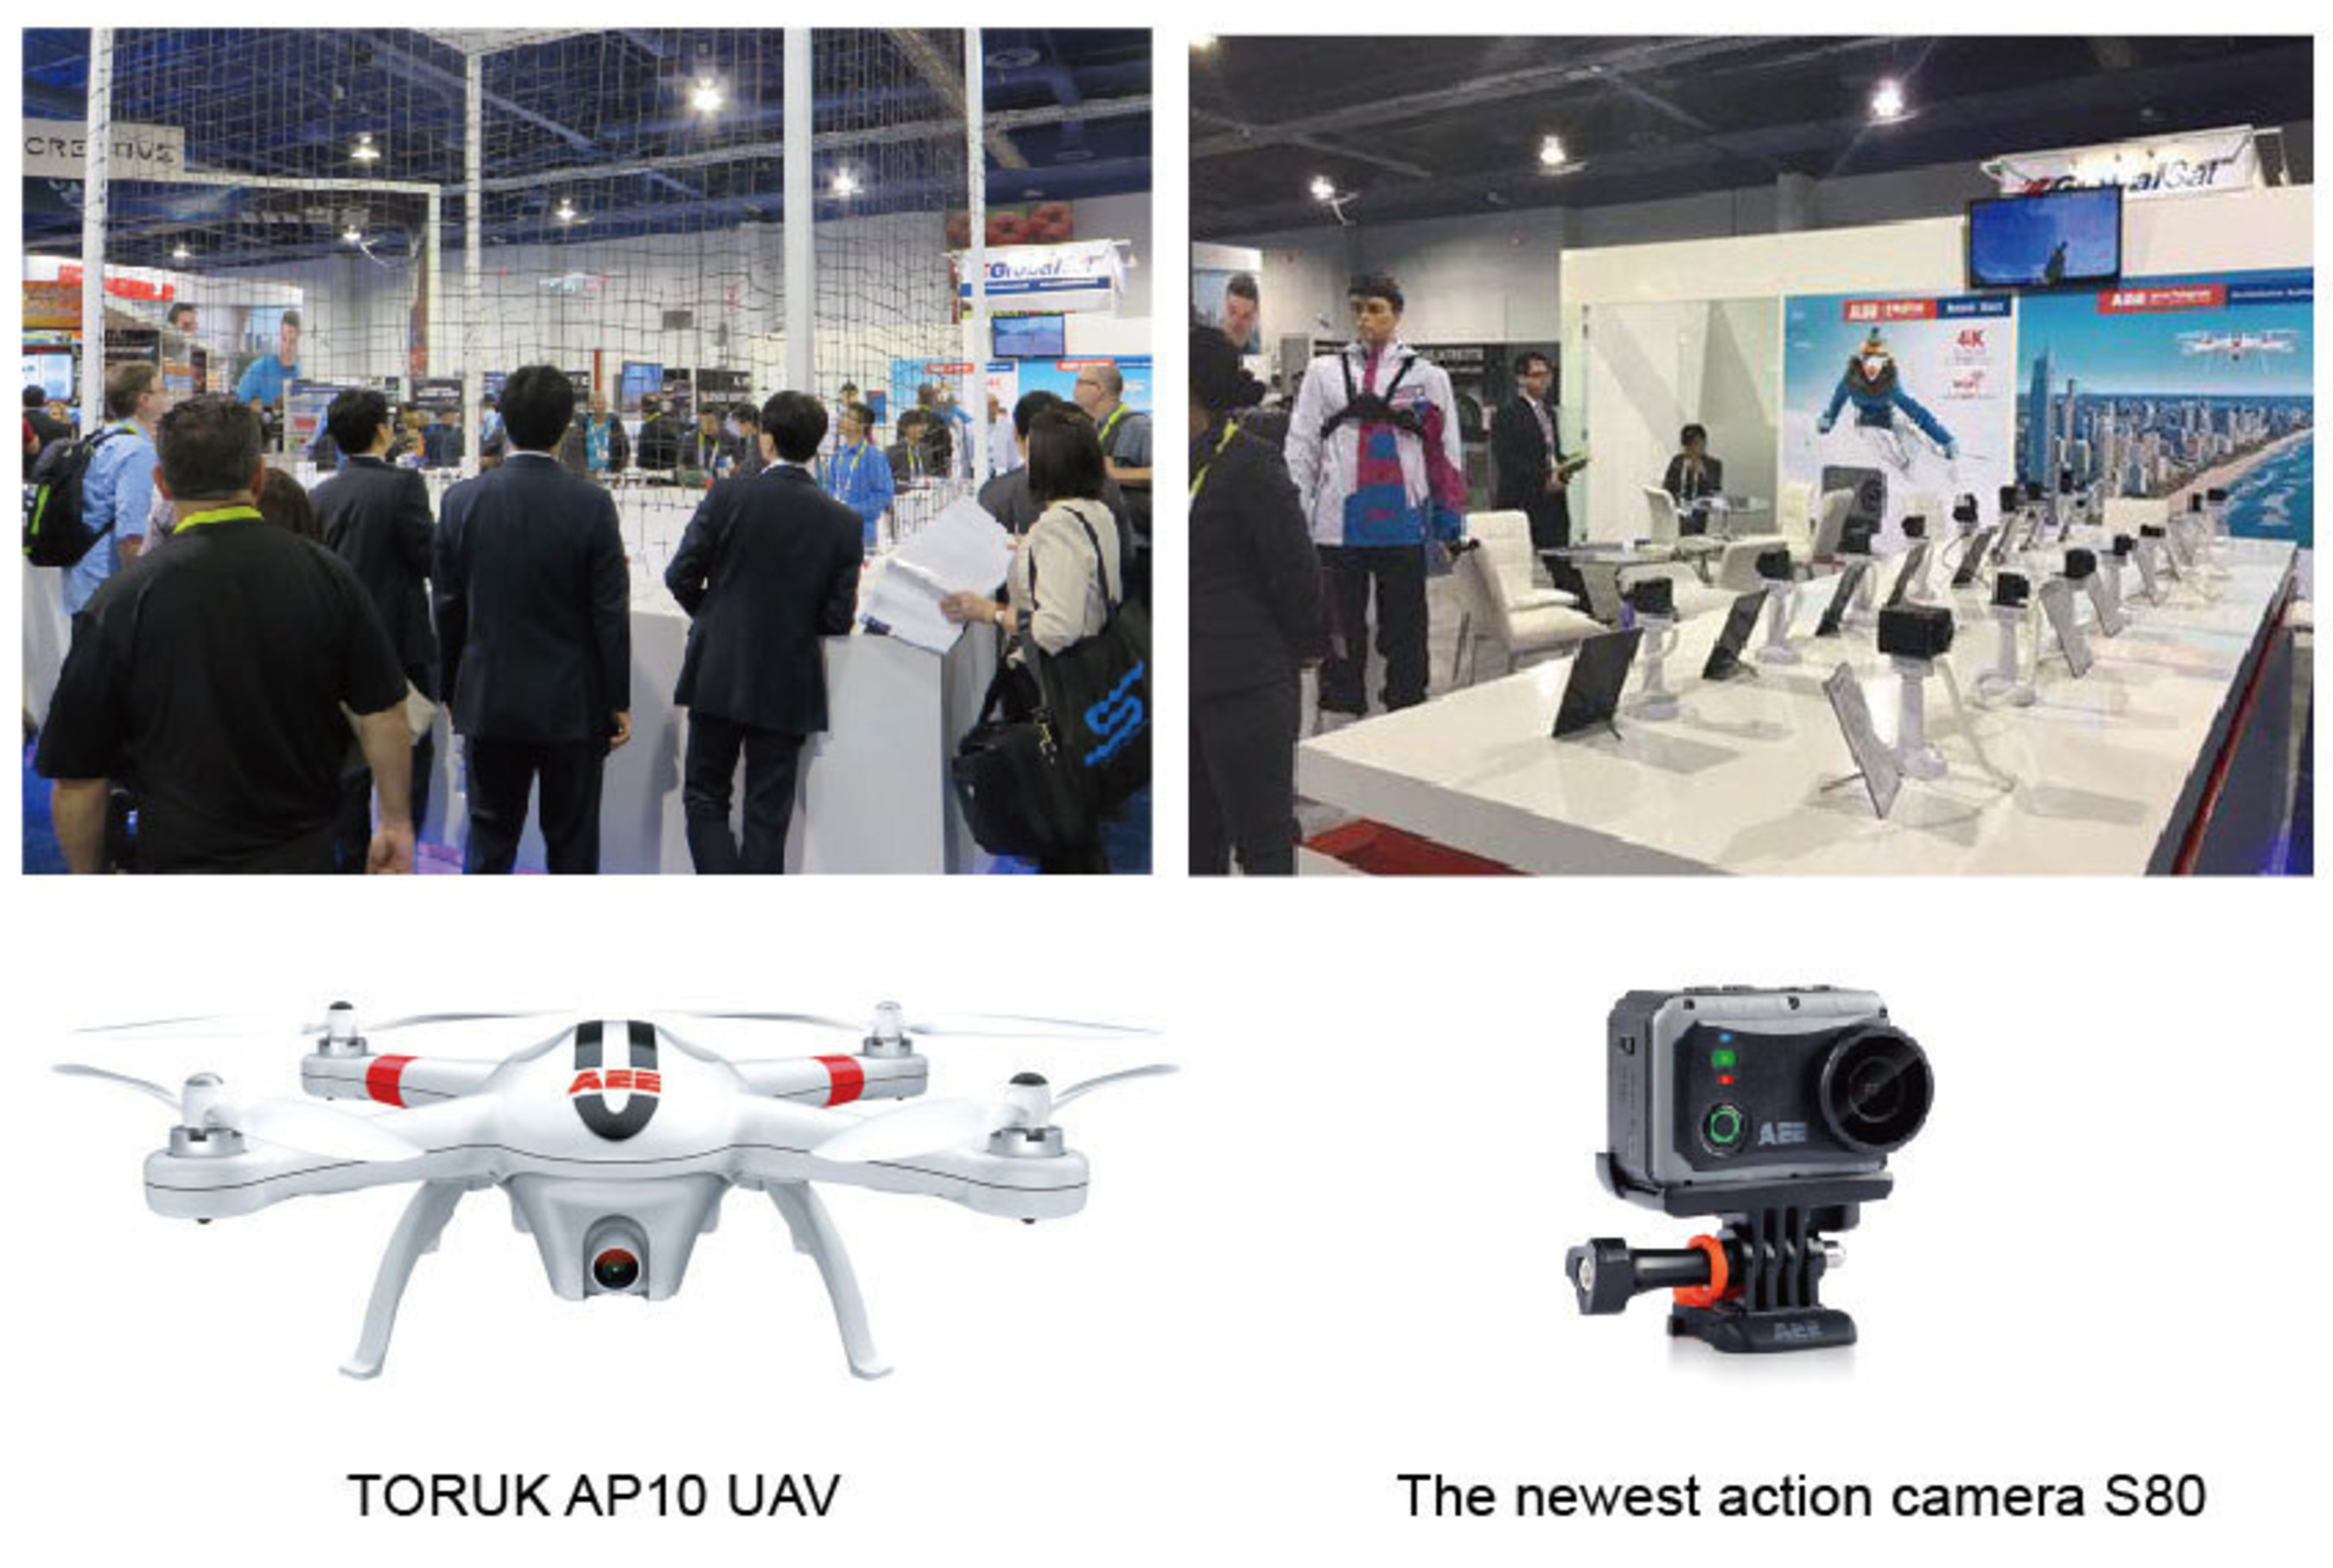 AEE UAV AP10 and action camera S80 are amazing at CES